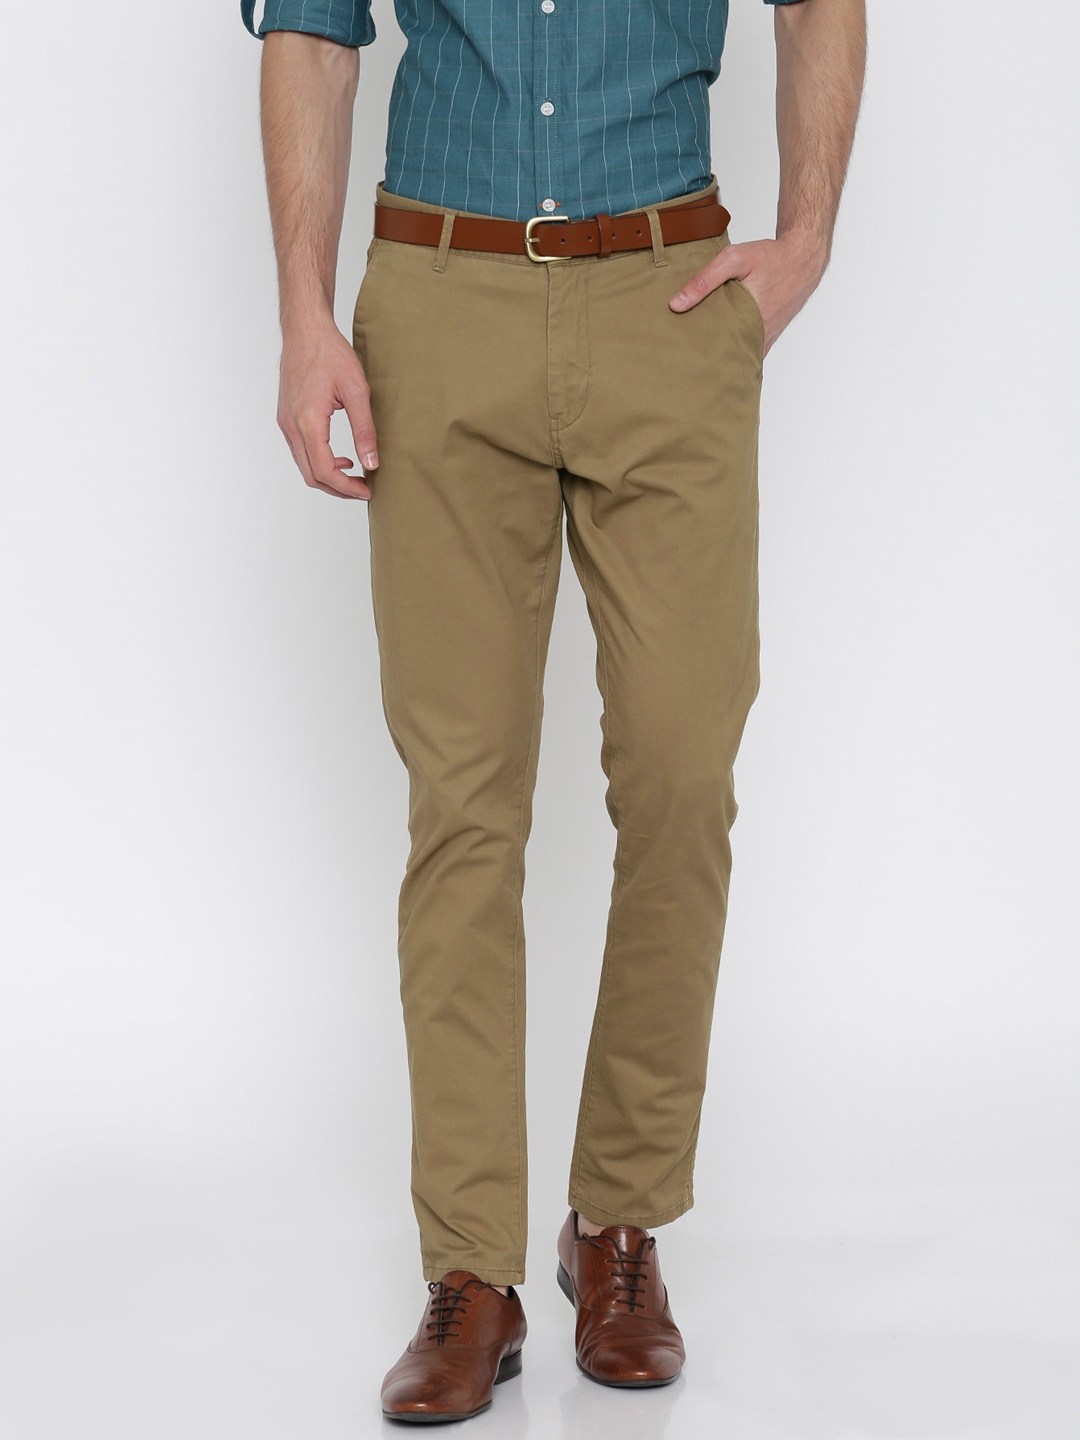 Buy Mast  Harbour Khaki Anchor Slim Differential Length Chino Trousers   Trousers for Men 1368601  Myntra